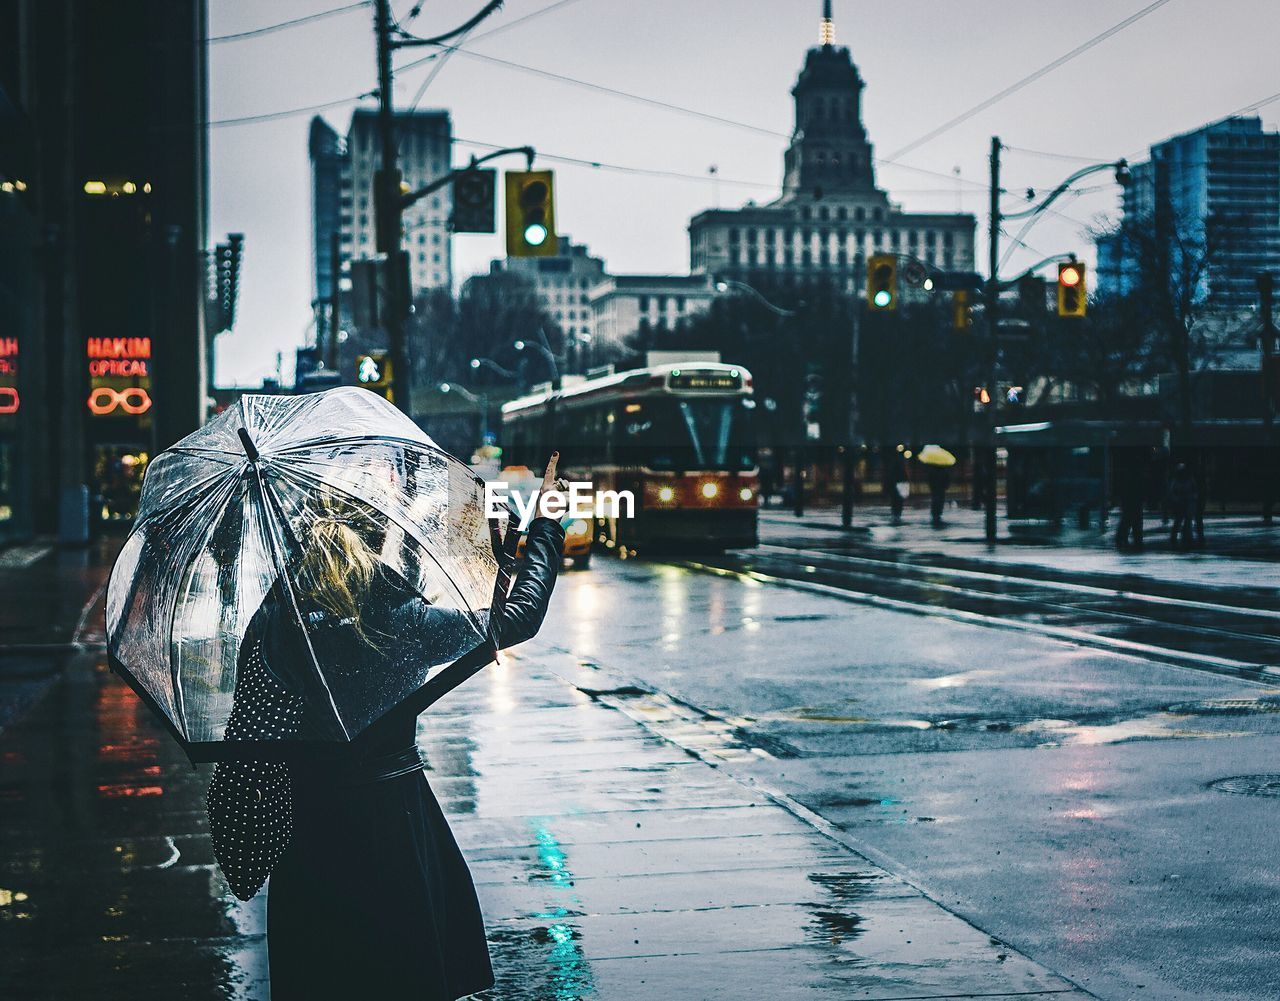 Rear view of woman with umbrella standing on wet city street during monsoon